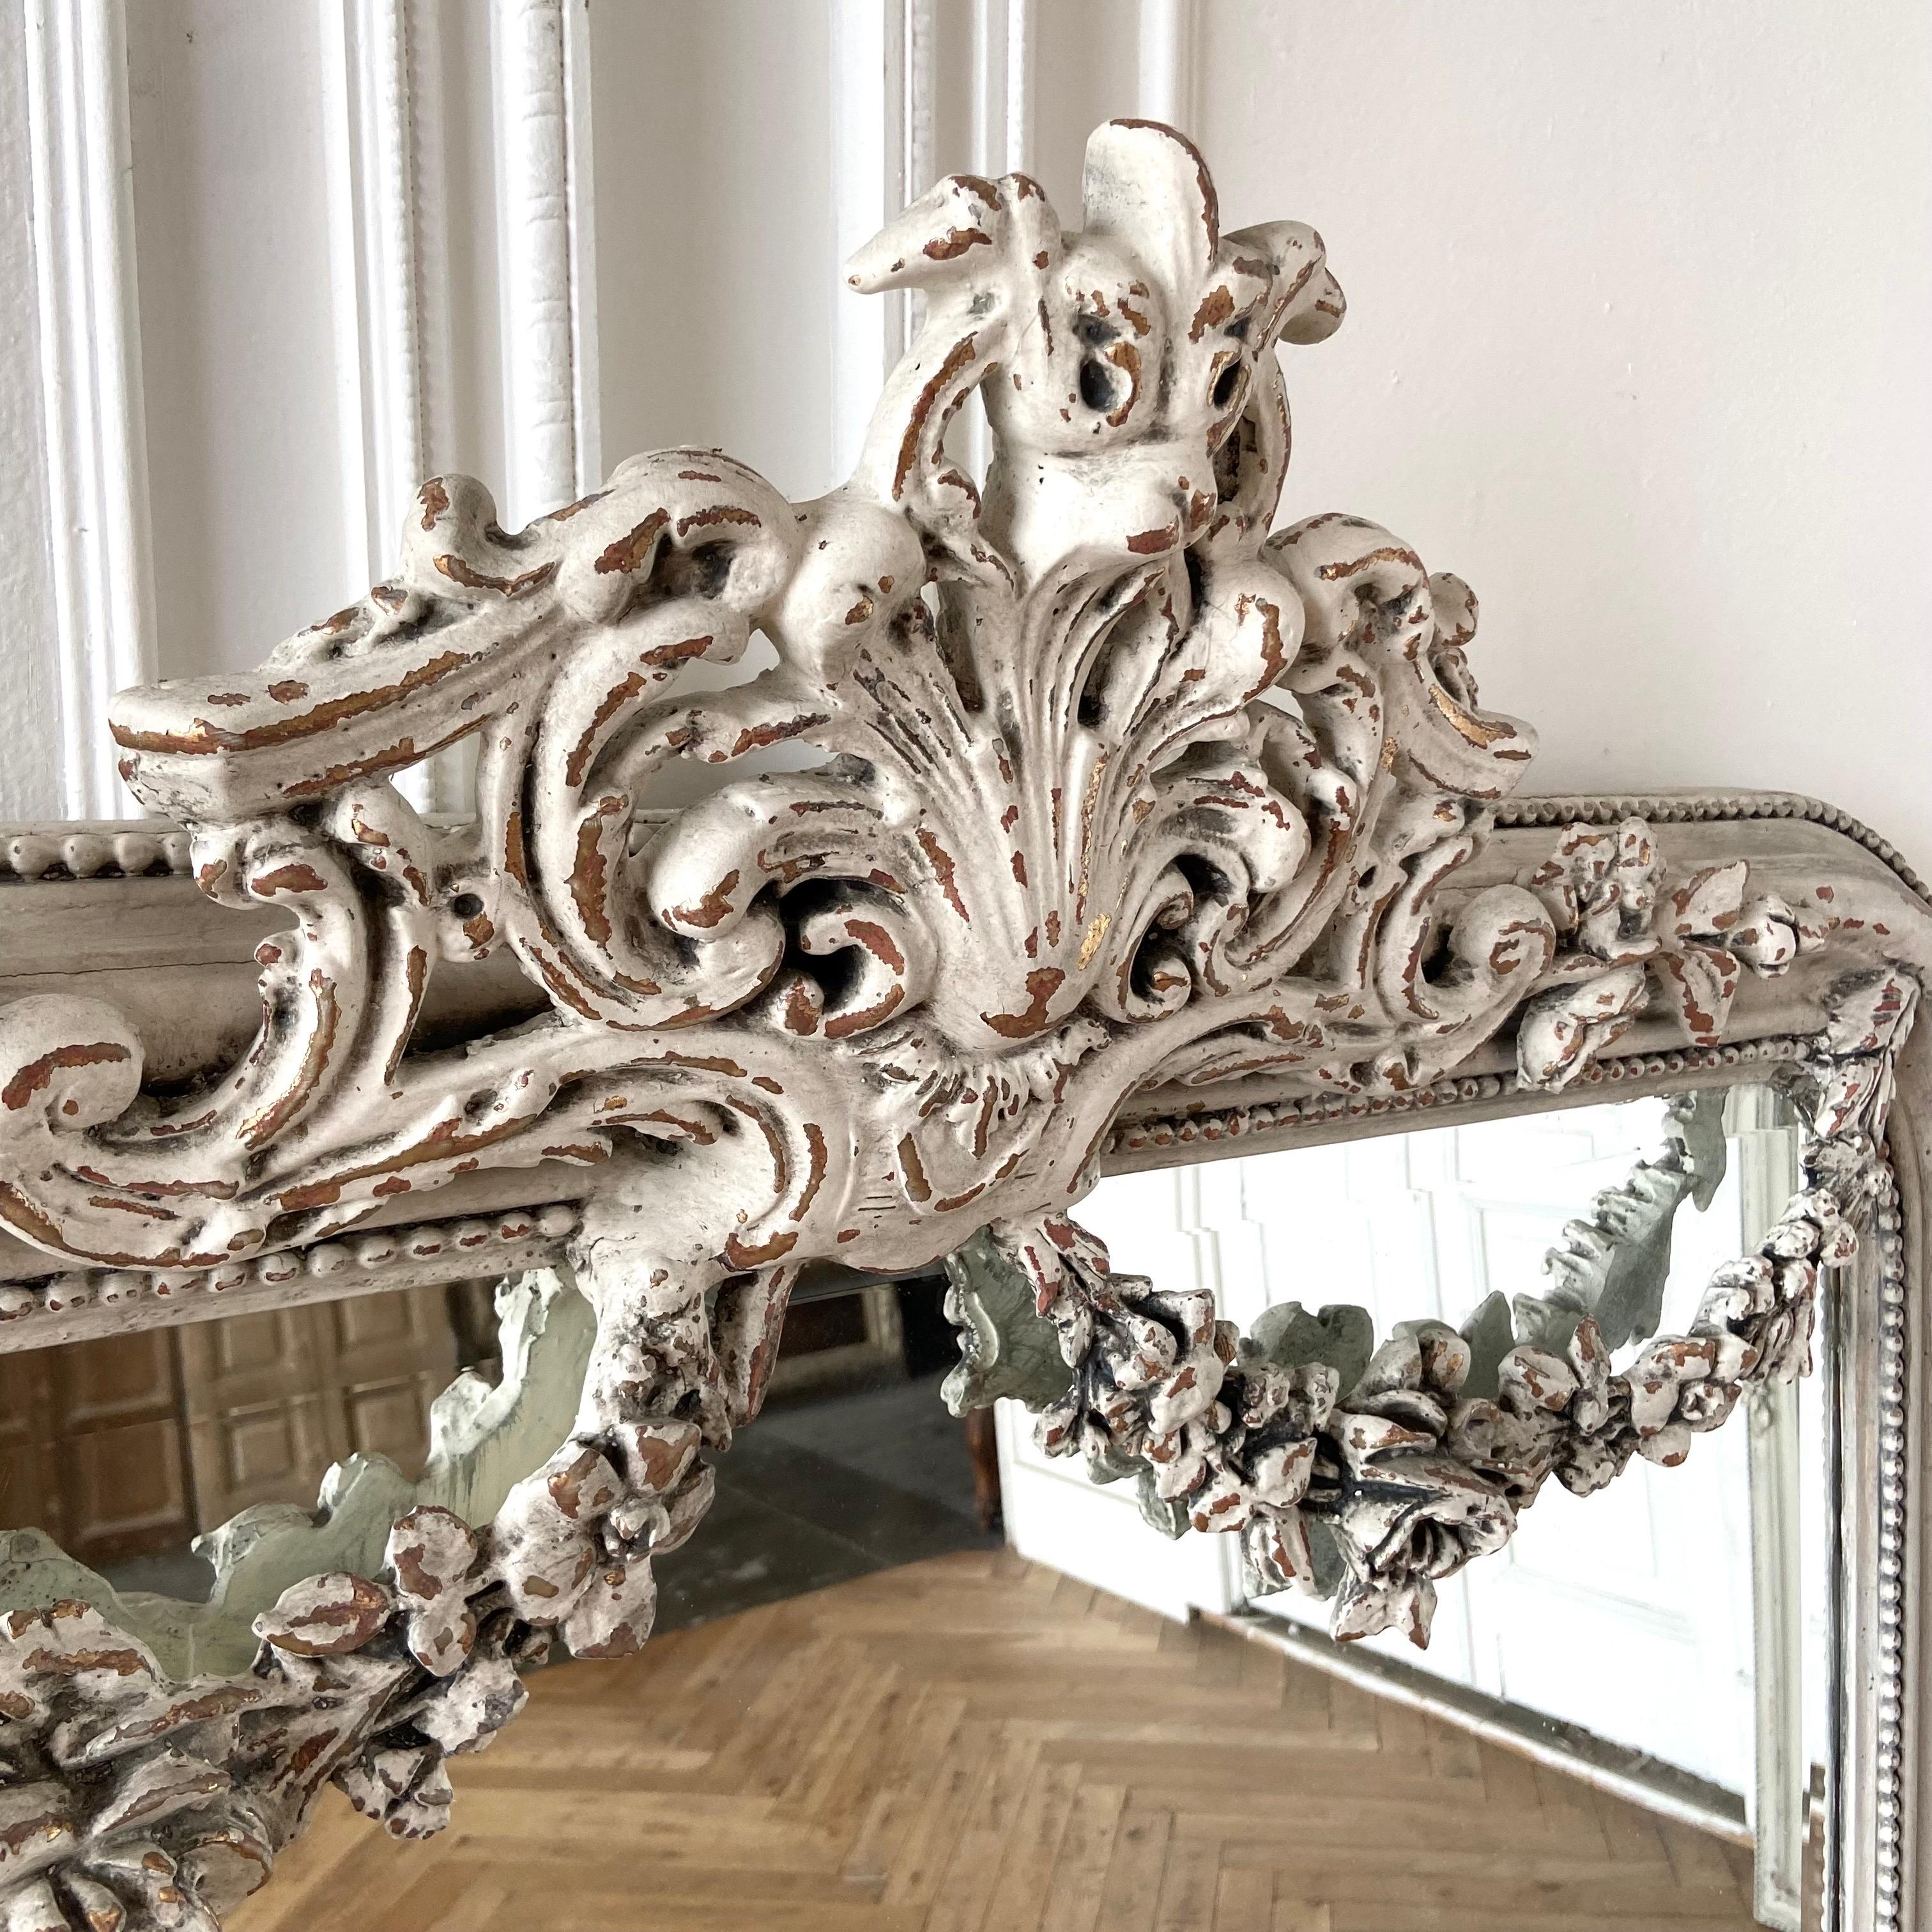 Beautiful reproduction of an antique French style. Large cartouche with rose swags. Made from wood and resin materials. Painted in a soft oyster white with subtle distressed edges and antique patina.
rose swag mirror 38-1/2”w x 59”h
Multiple